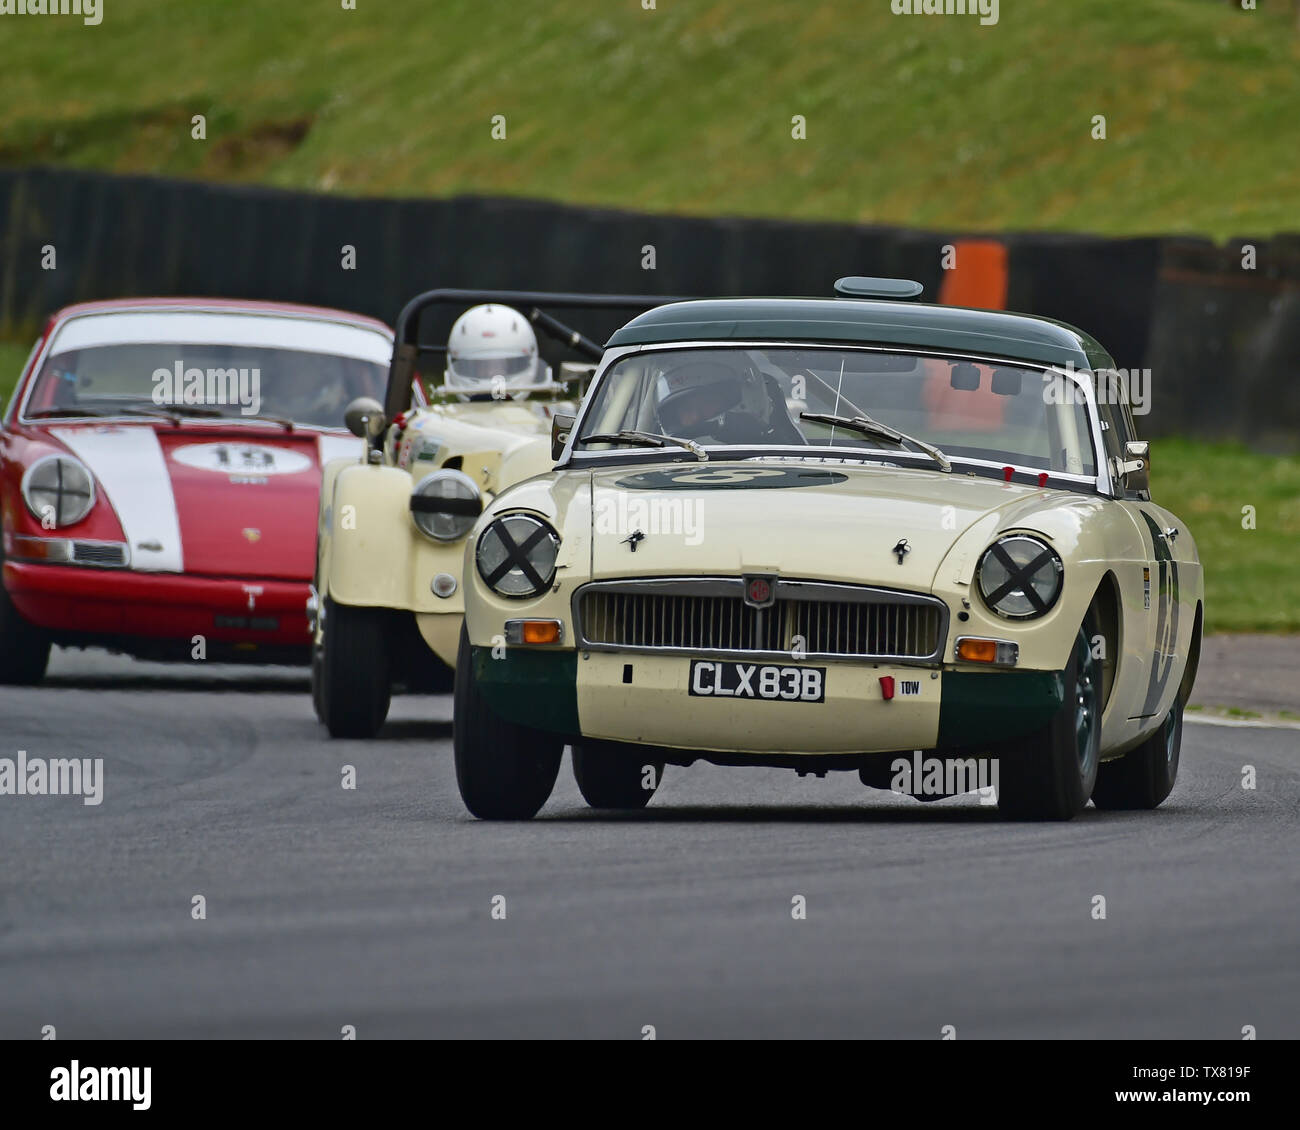 David Keers Trafford, MGB, Equipe GTS, Masters Historic Festival, Brands Hatch, May 2019. Brands Hatch, classic cars, classic event, Classic Racing Ca Stock Photo